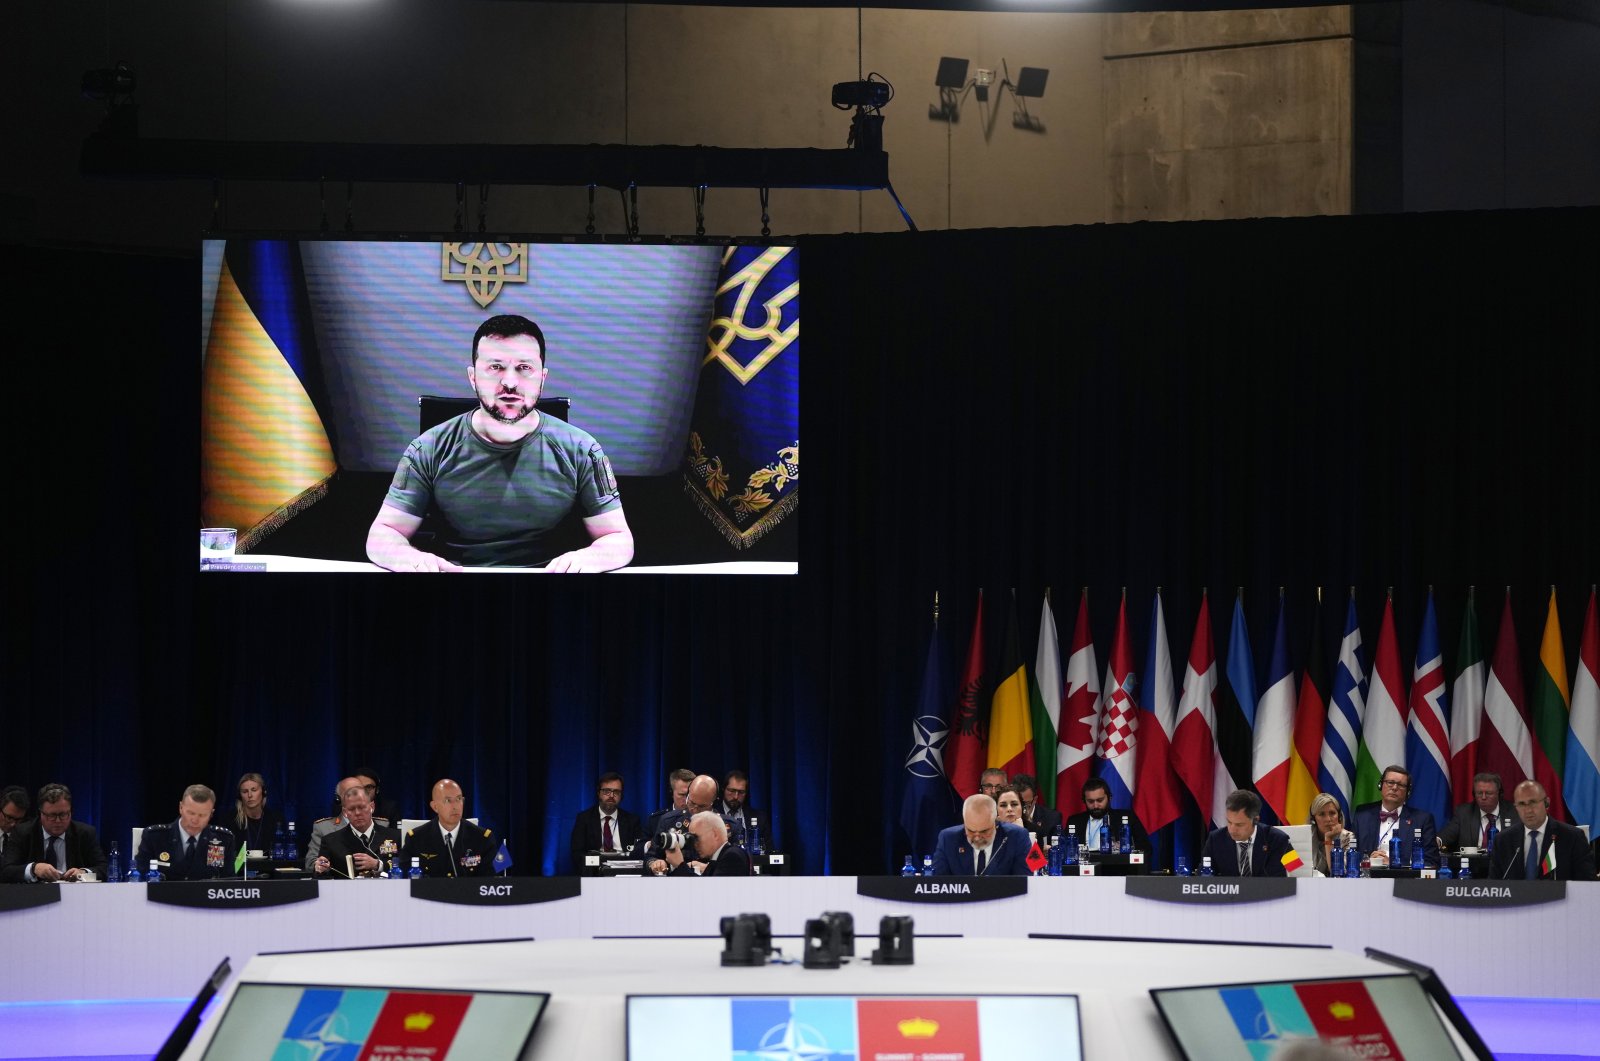 Ukraine&#039;s President Volodymyr Zelenskyy addresses leaders via video during a roundtable meeting at a NATO summit in Madrid, Spain, June 29, 2022. (AP Photo)